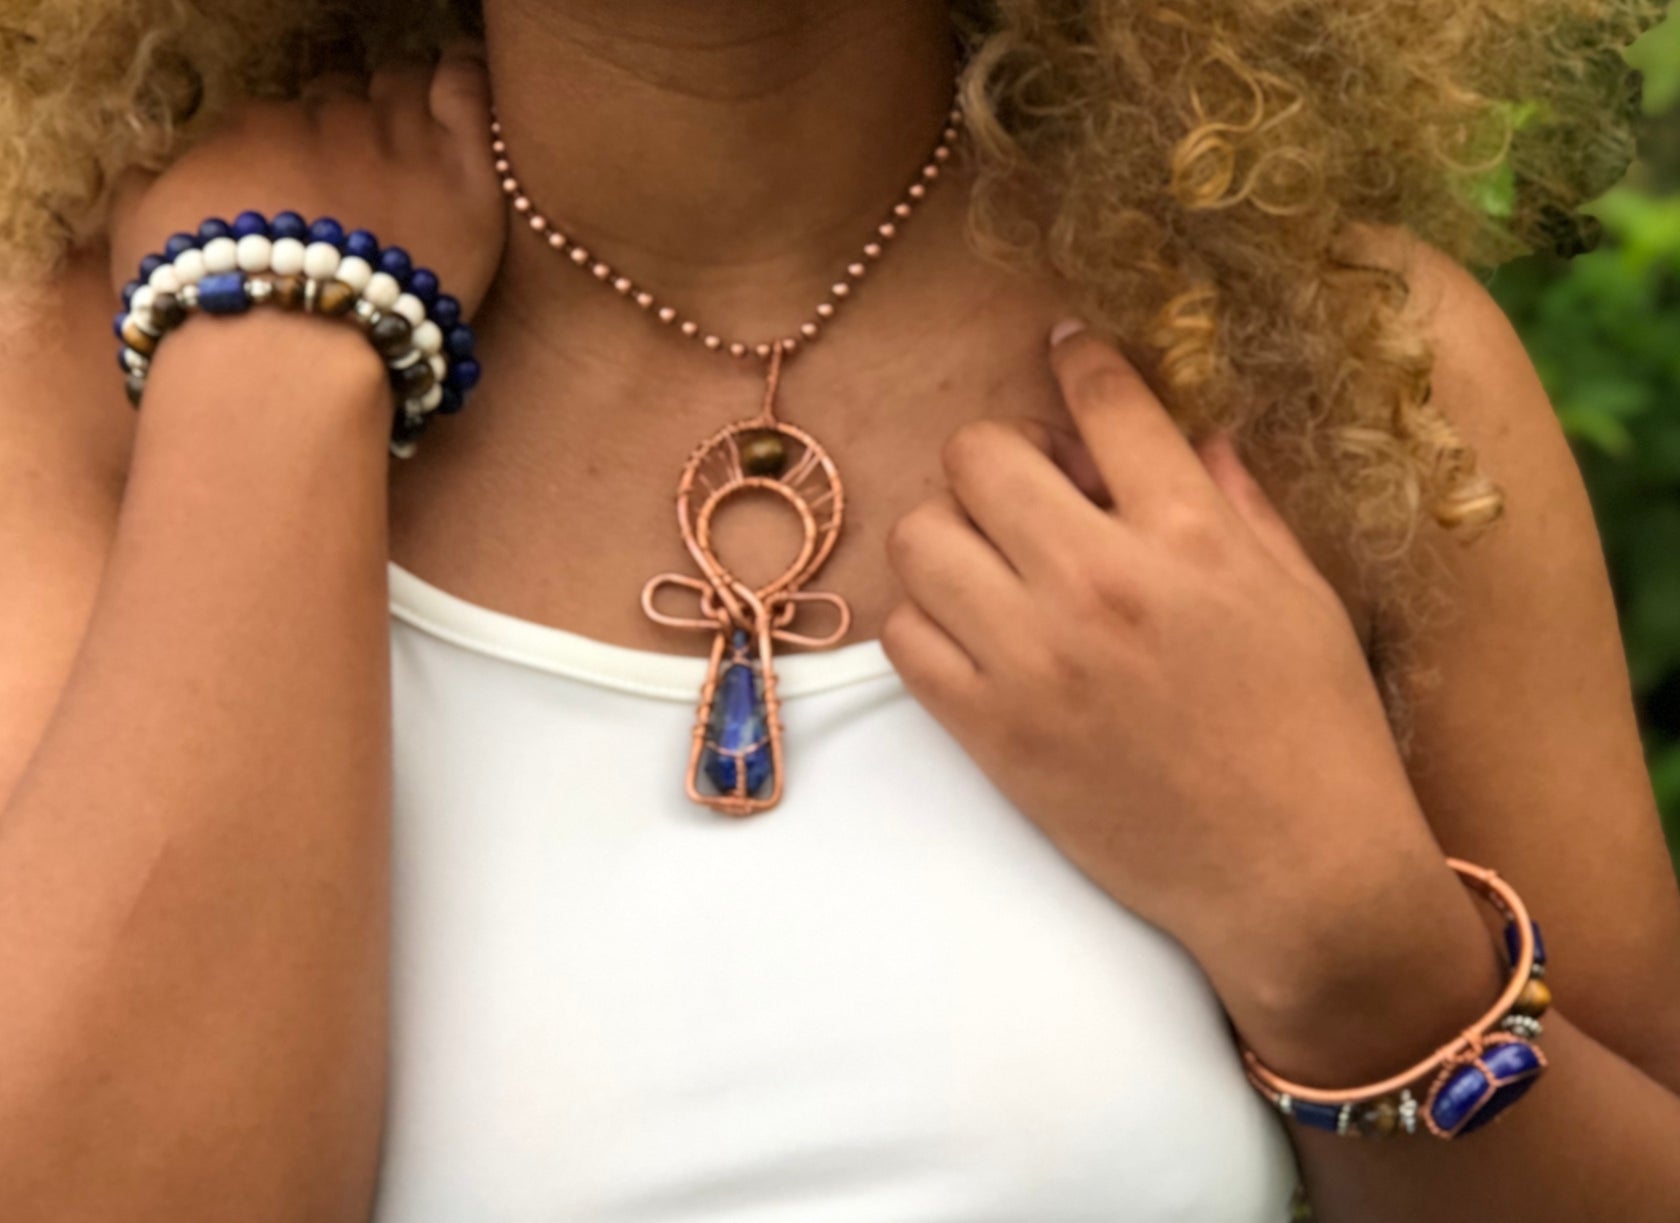 model wearing lapis ankh pendant and howlite, lapis, tigers eye stretchy bracelets. She is also wearing a copper wirewrapped bangle made with lapis lazuli and tigers eye.